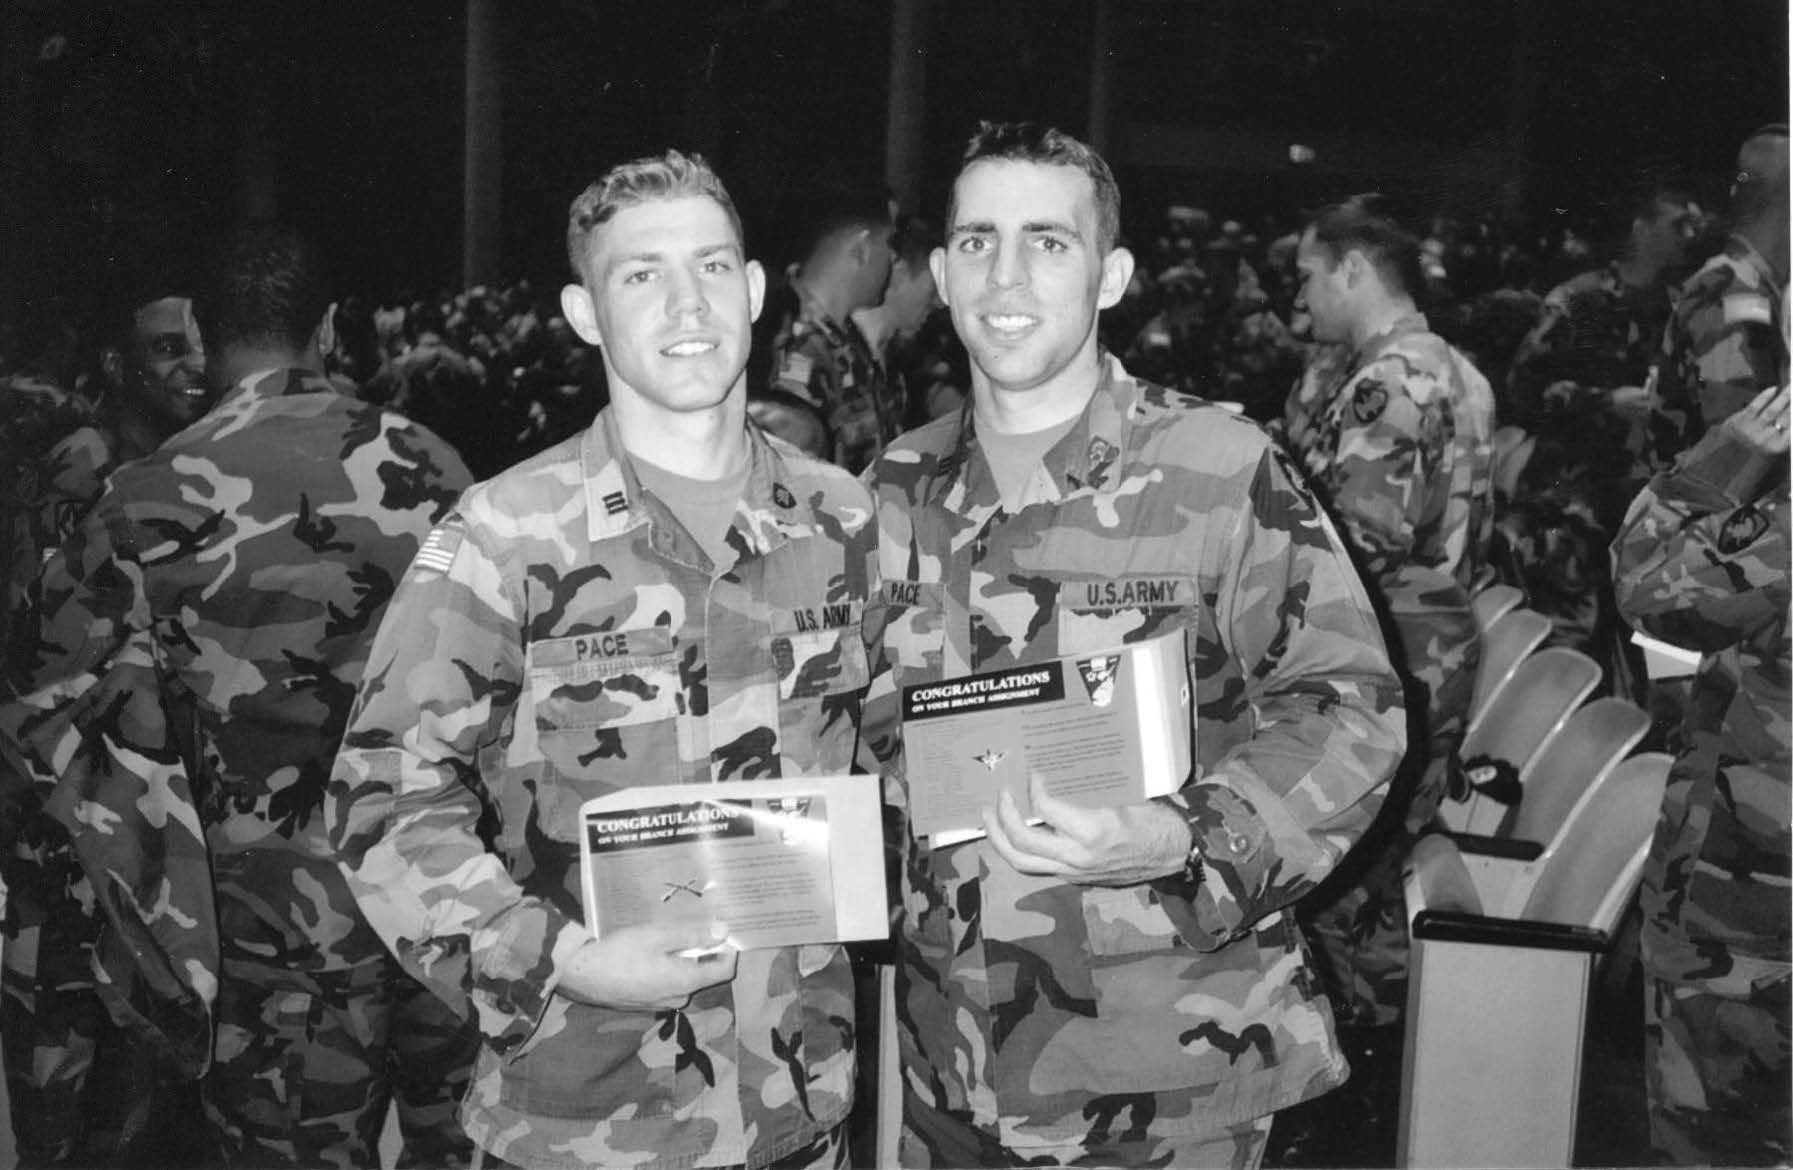 U.S. Military Academy cadets Rick Pace (left) and his older brother, Scott, celebrate after receiving their officer branch assignments at West Point. Rick was branched in the infantry, and Scott was assigned to aviation. Courtesy of Rick Pace.